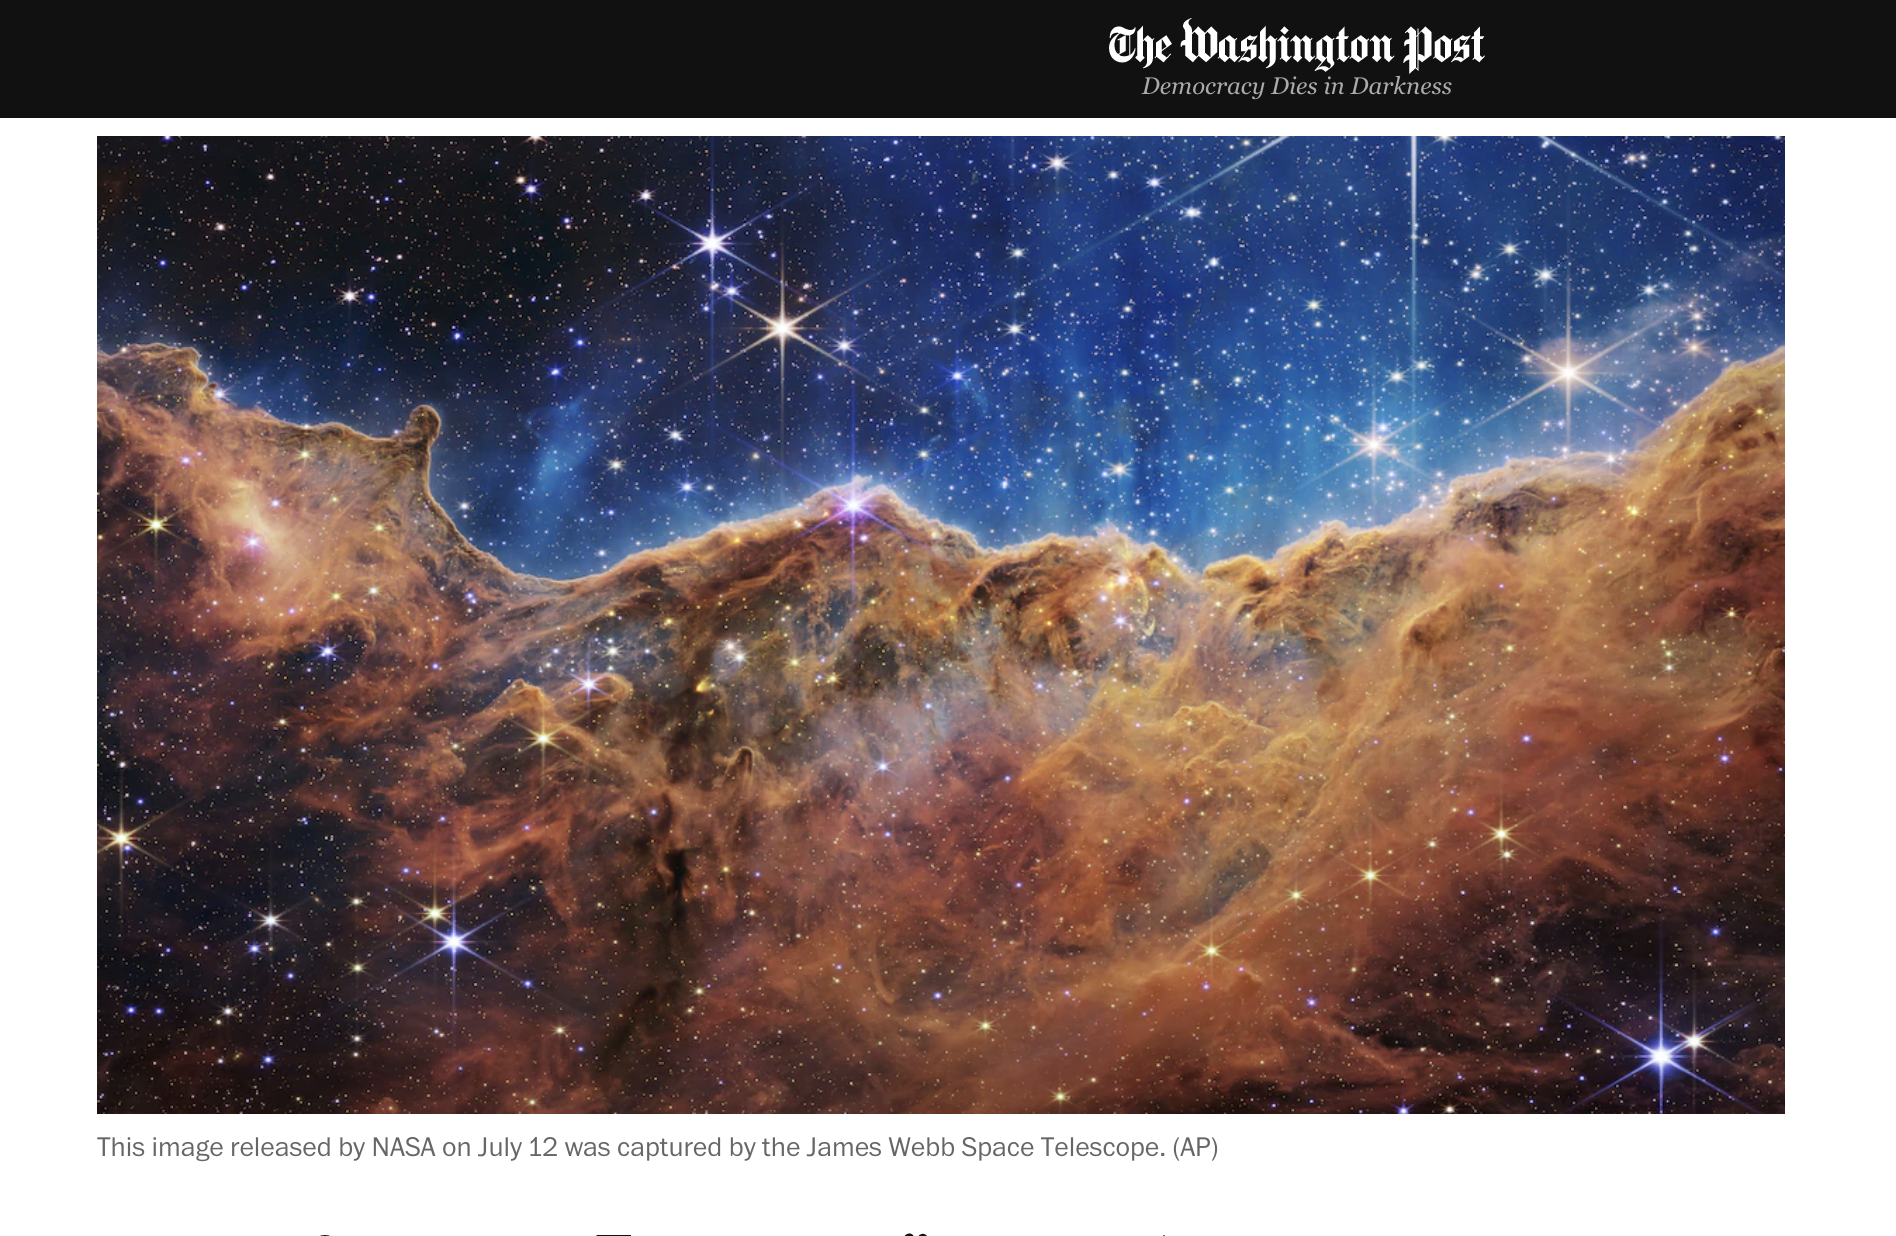 Screenshot shows a Washington Post article zoomed in on just an image and caption. The caption says, 'This image released by NASA on July 12 was captured by the James Webb Space Telescope. (AP)' NASA's alt text for the image is below.